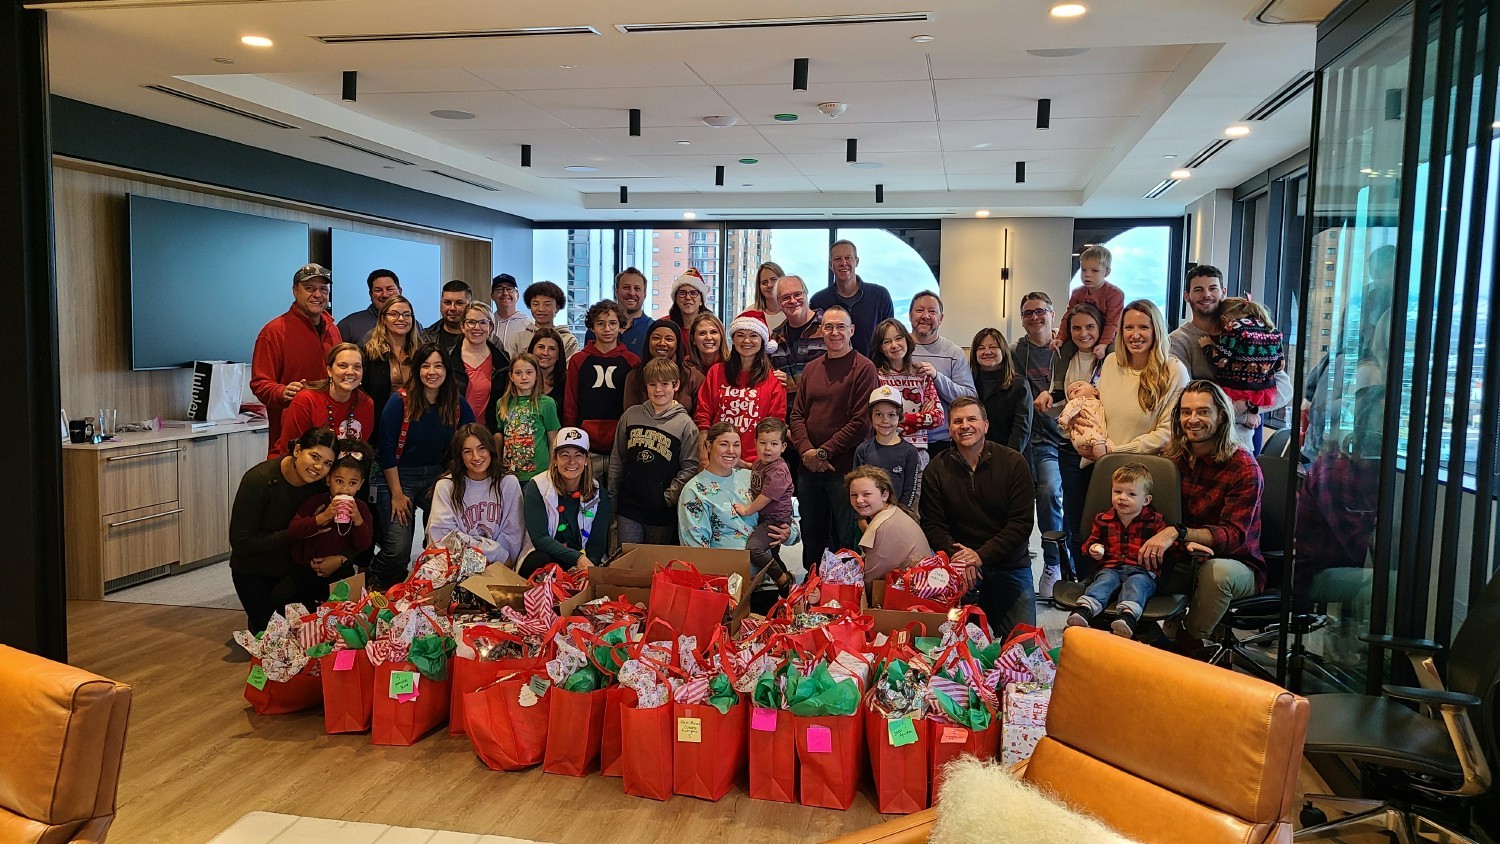 RevGeners and their families gathered in our office to wrap donated gifts for 59 children at a local elementary school.